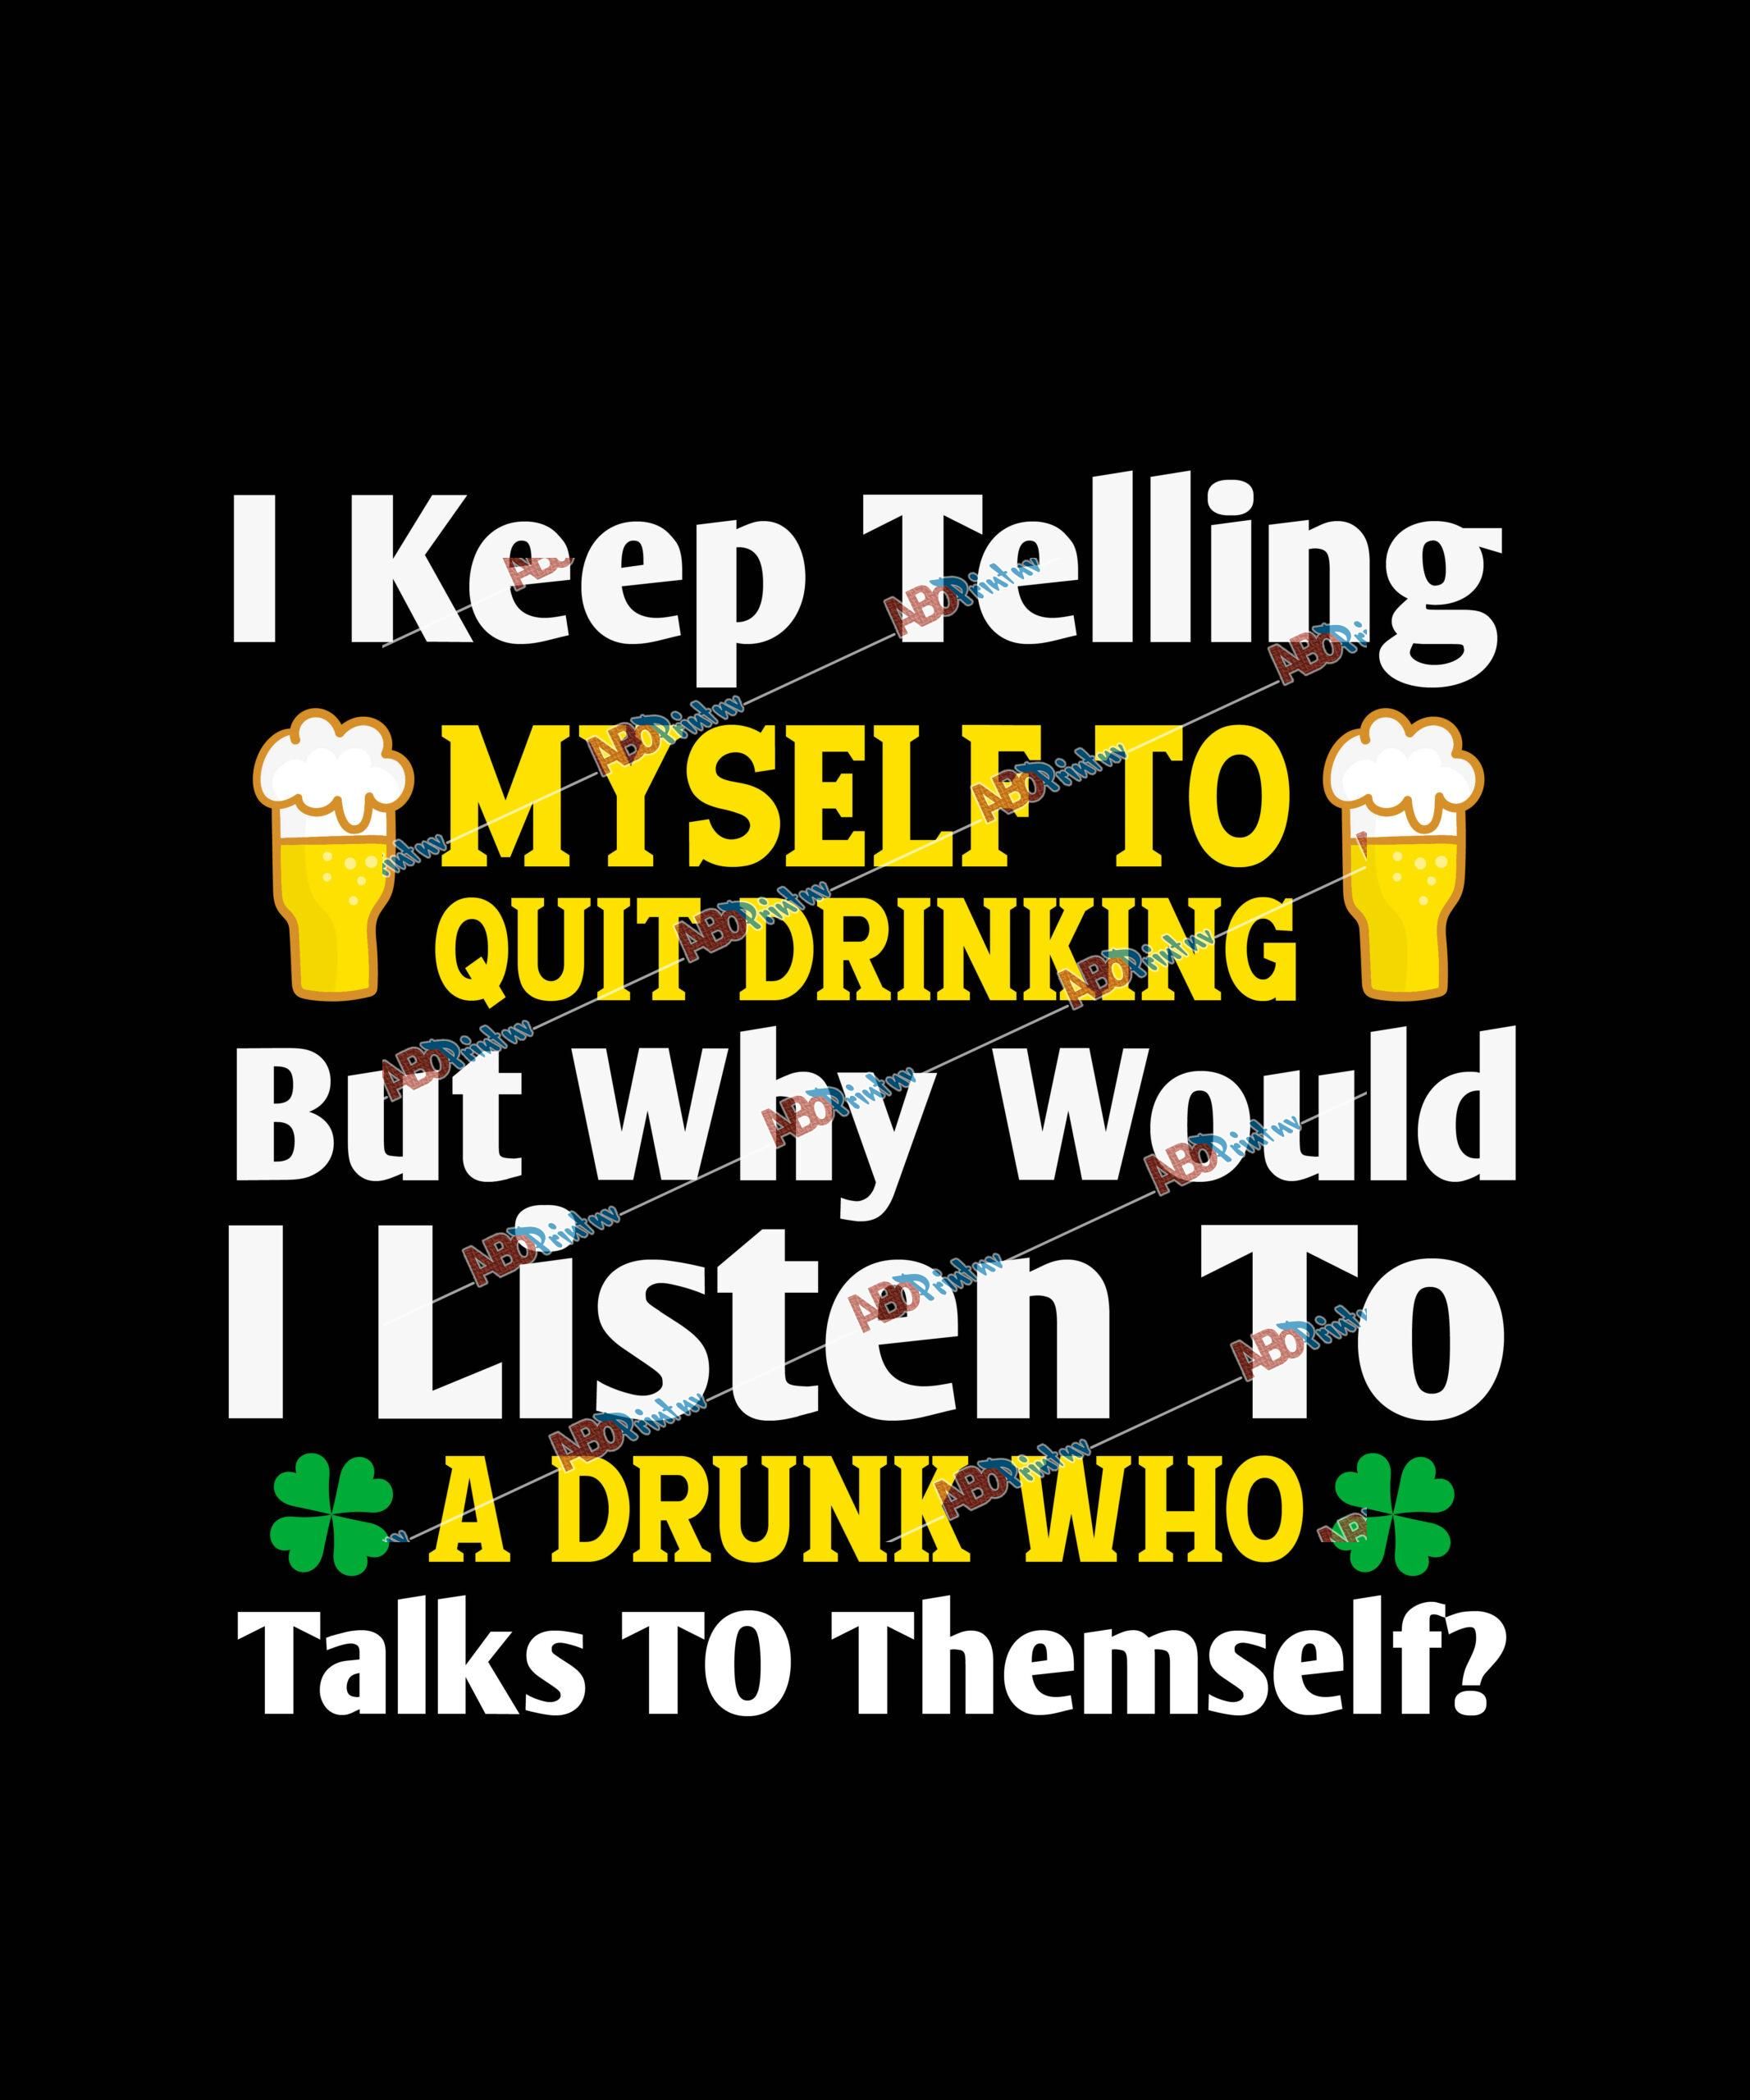 I Keep Telling Myself To Quit Drinking But Why Would A Listen To A Drunk Who